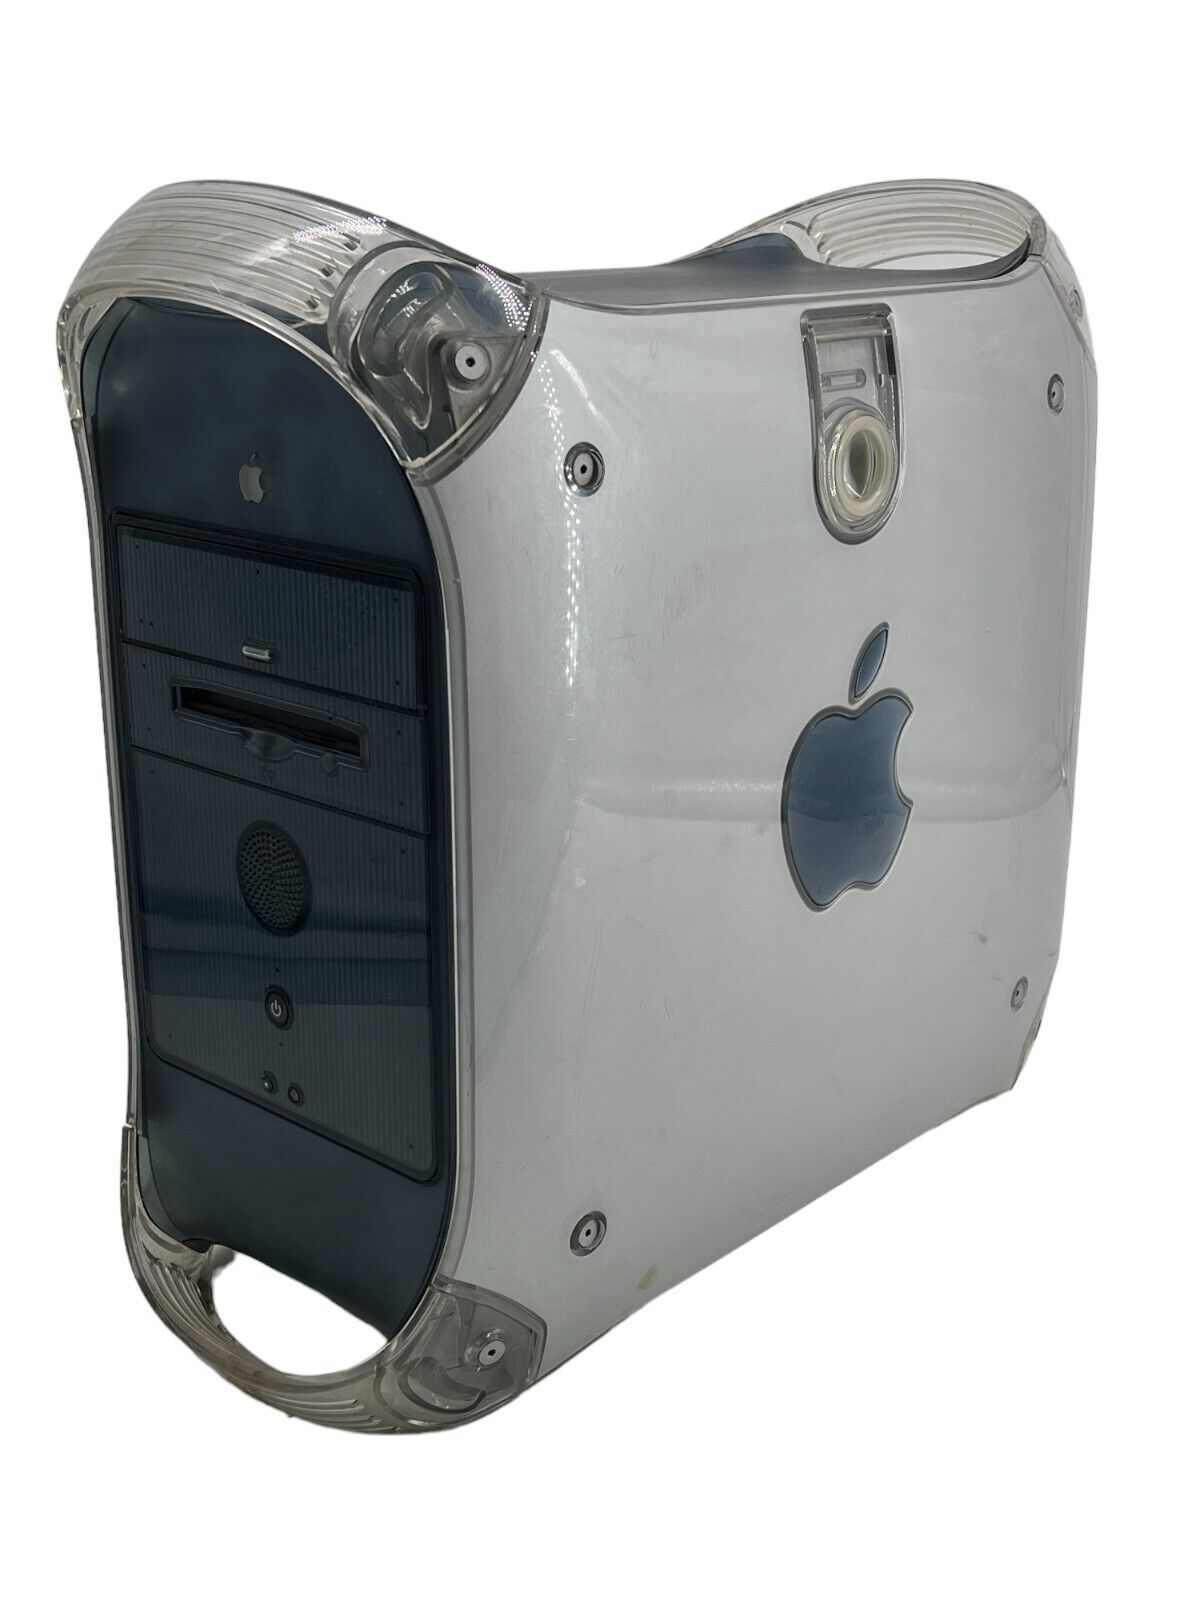 Apple Power Mac G4 AS IS NO TESTED